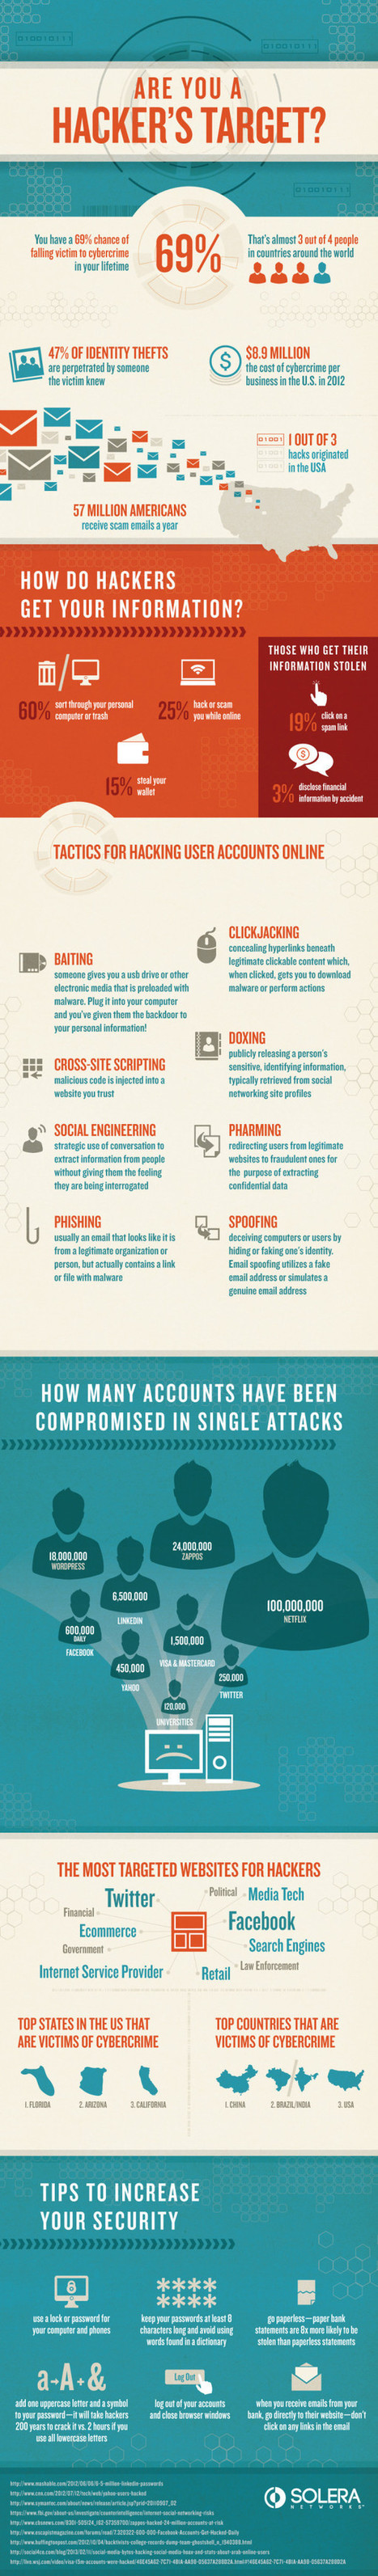 Are you a hacker's target? [infographic] | 21st Century Learning and Teaching | Scoop.it